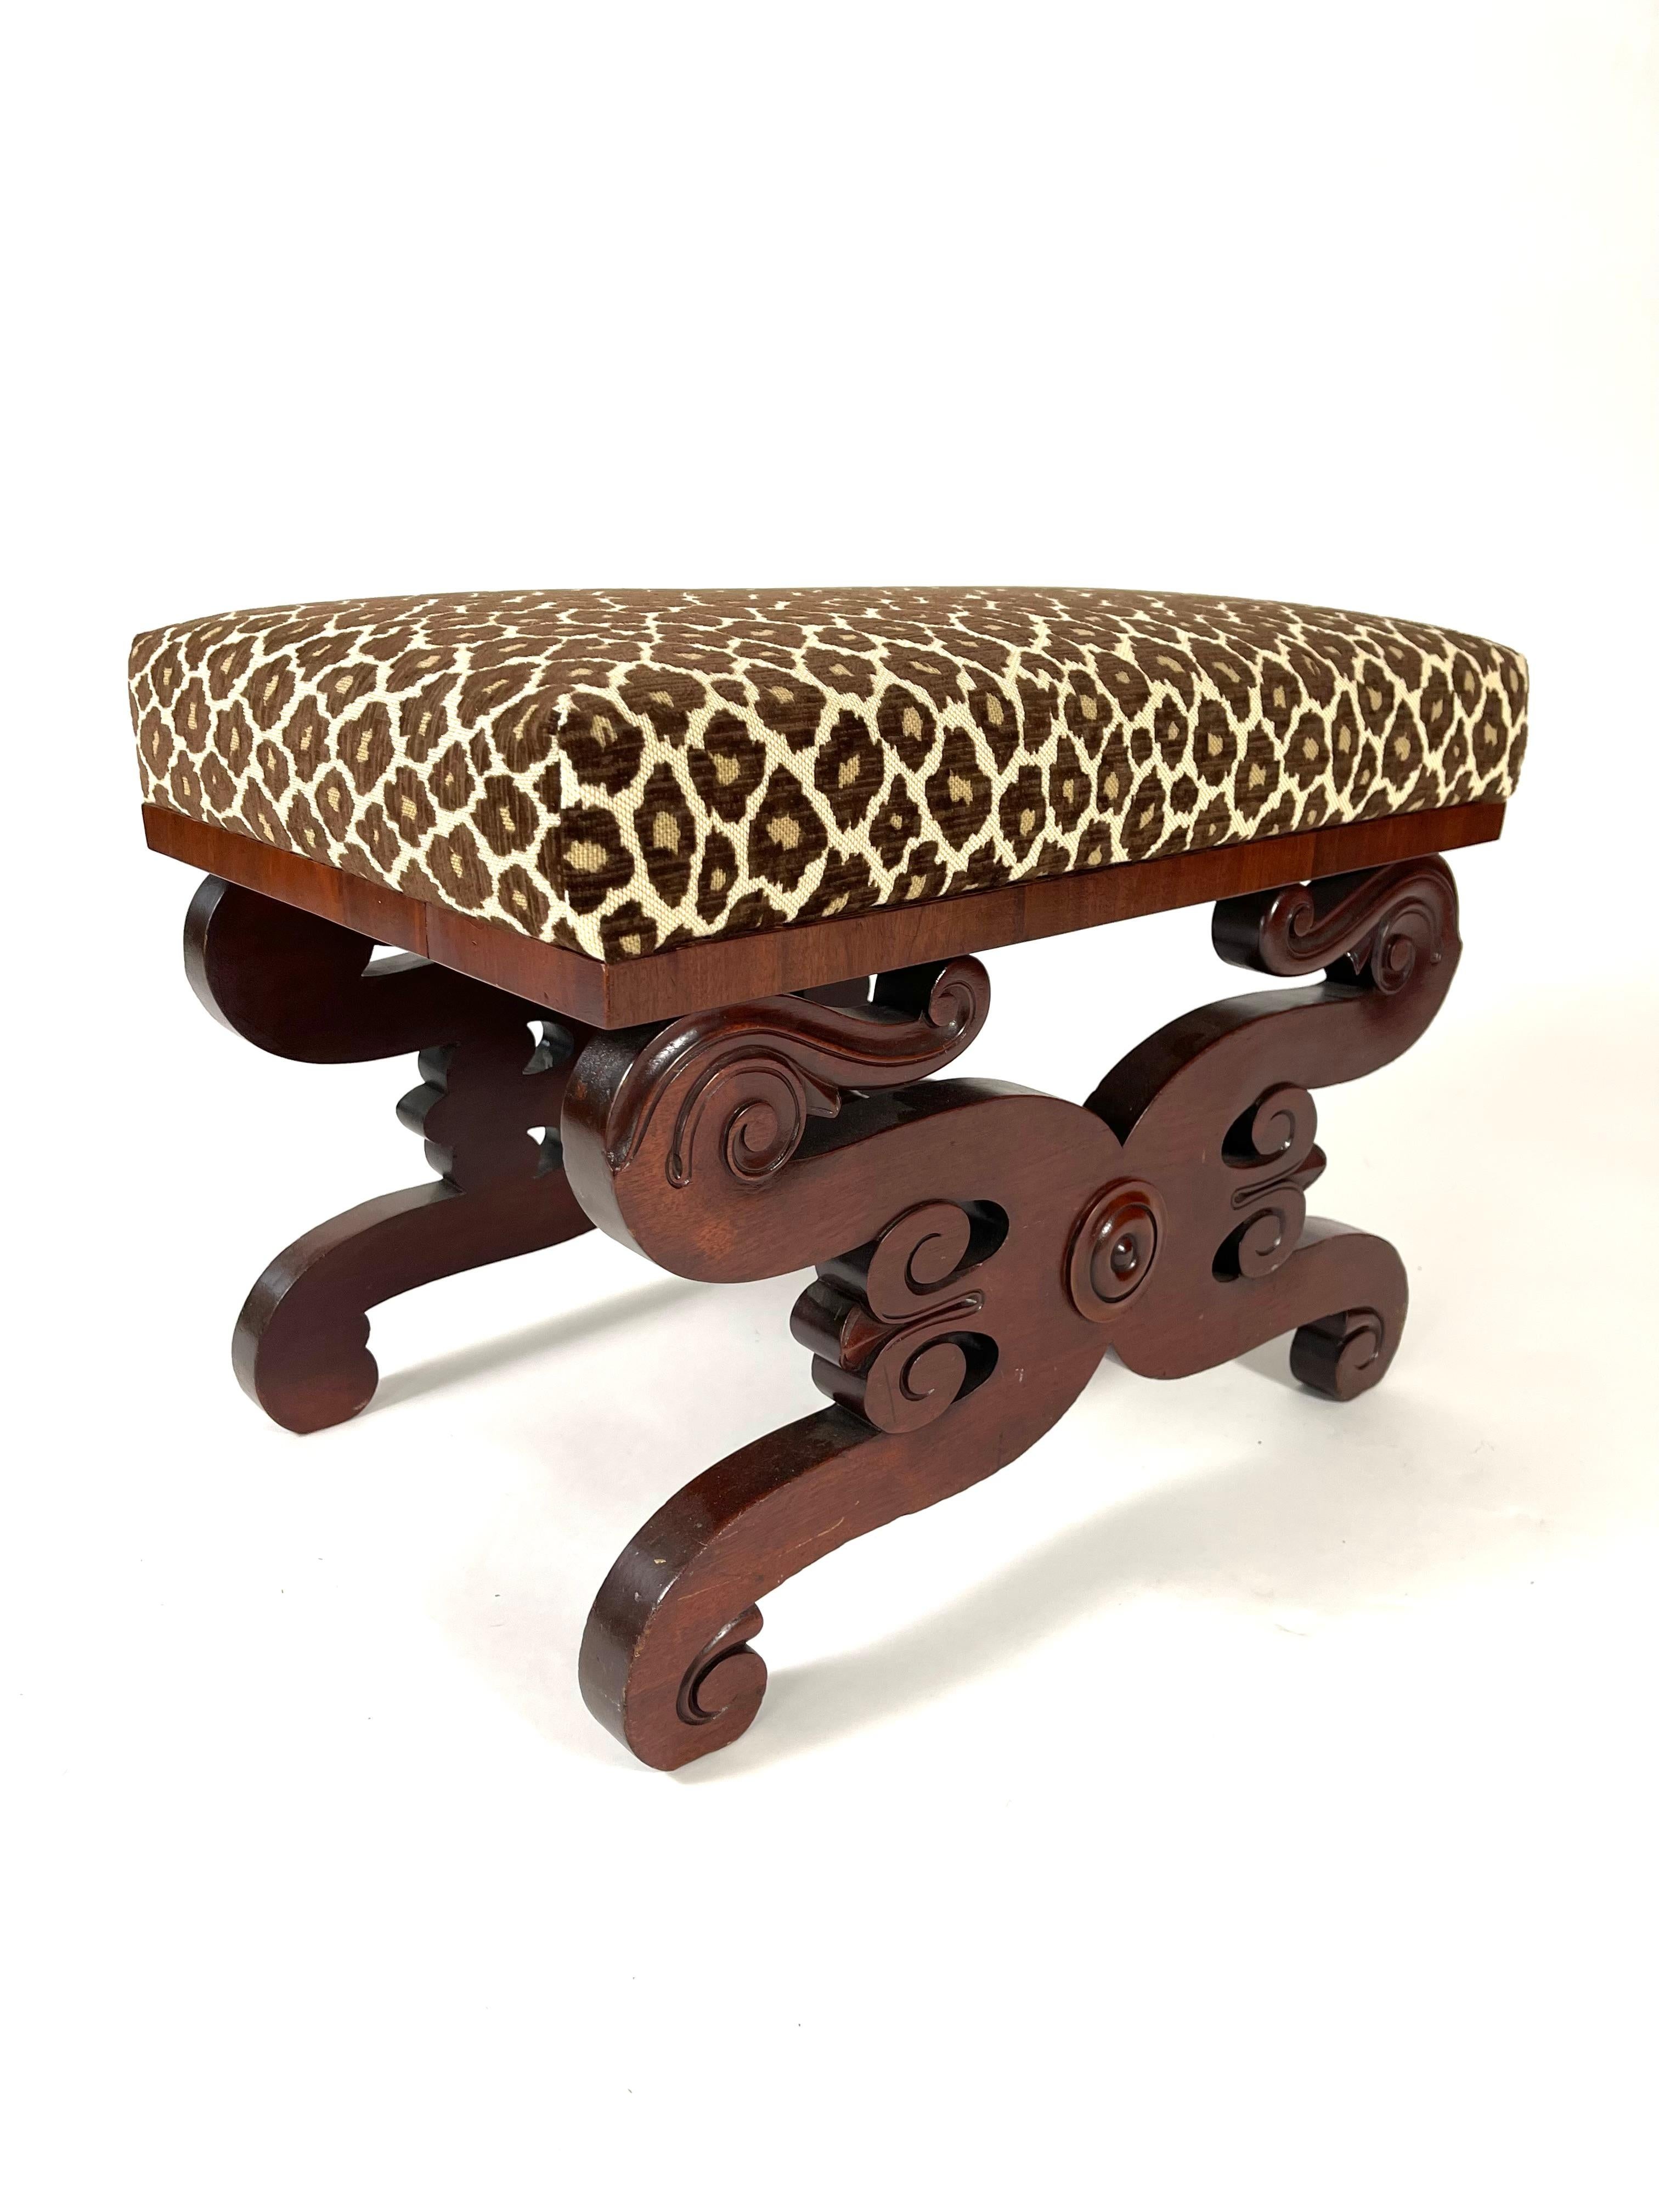 A Classical carved mahogany footstool, or ottoman, the top newly upholstered in leopard print velvet fabric over scrolled supports joined by a vase and ring-turned stretcher, Boston, circa 1820.  Beautifully made and very solid, this stool may serve